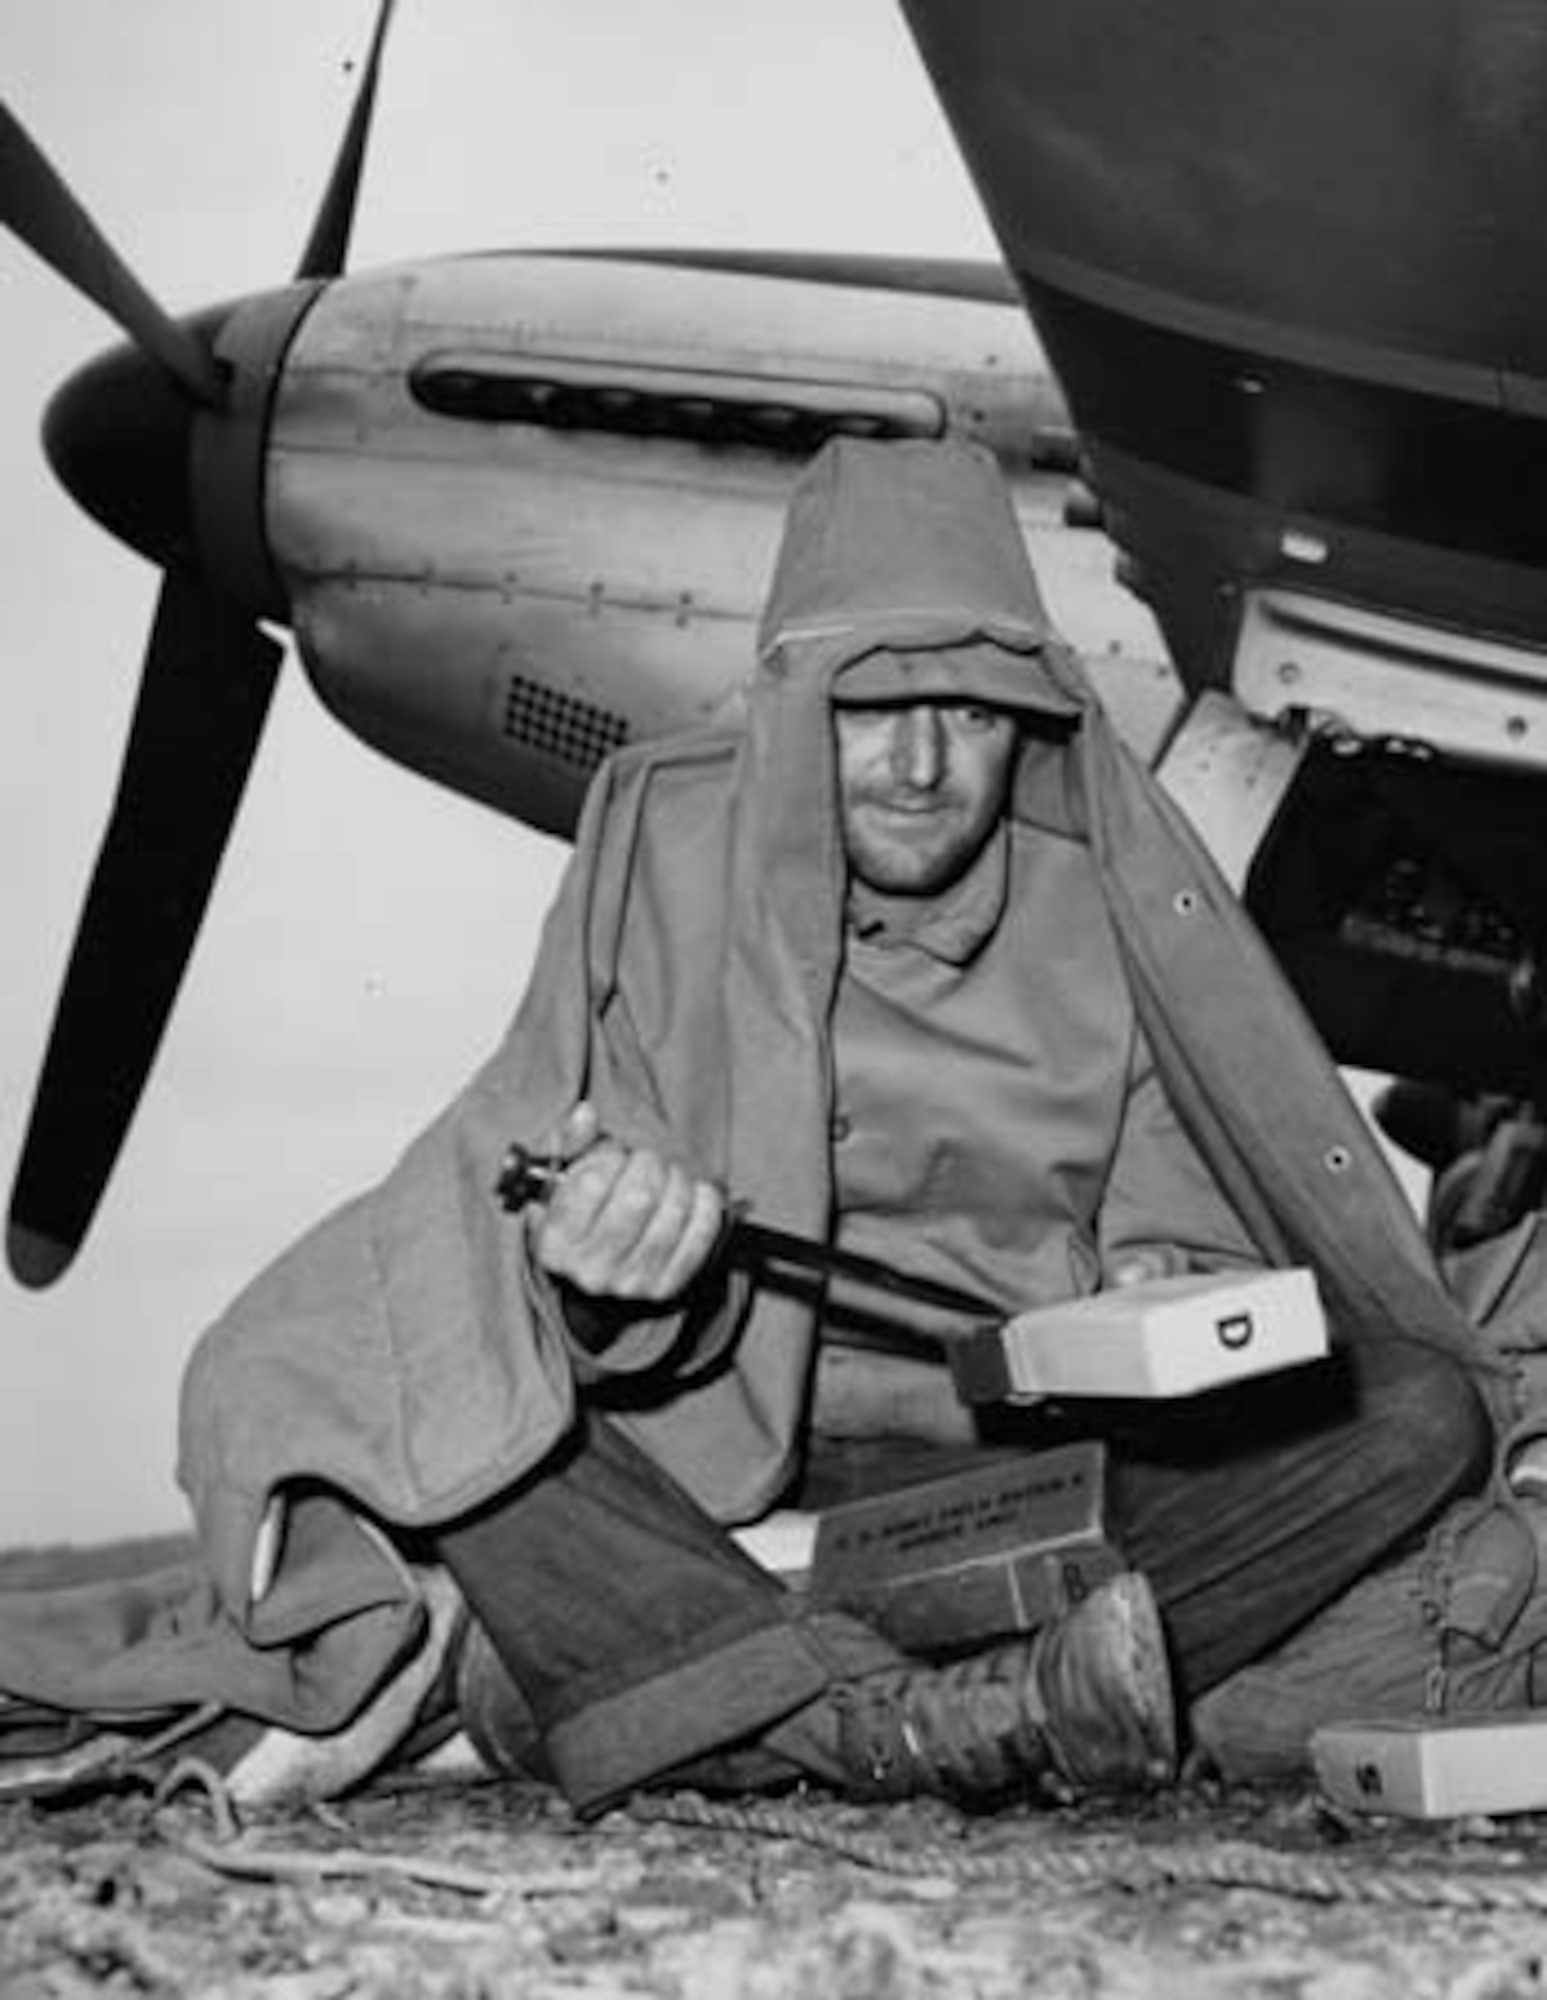 Huddled under a canopy blanket beneath the Wing of his 7th Air Force P-51 fighter on Iwo Jima, Crew Chief SSgt. Anthony A. Belesi, cuts open dry K-rations. Mechanics remained on the flight line 14 hours from dawn to dark with no shelter. (USAF file photo)
